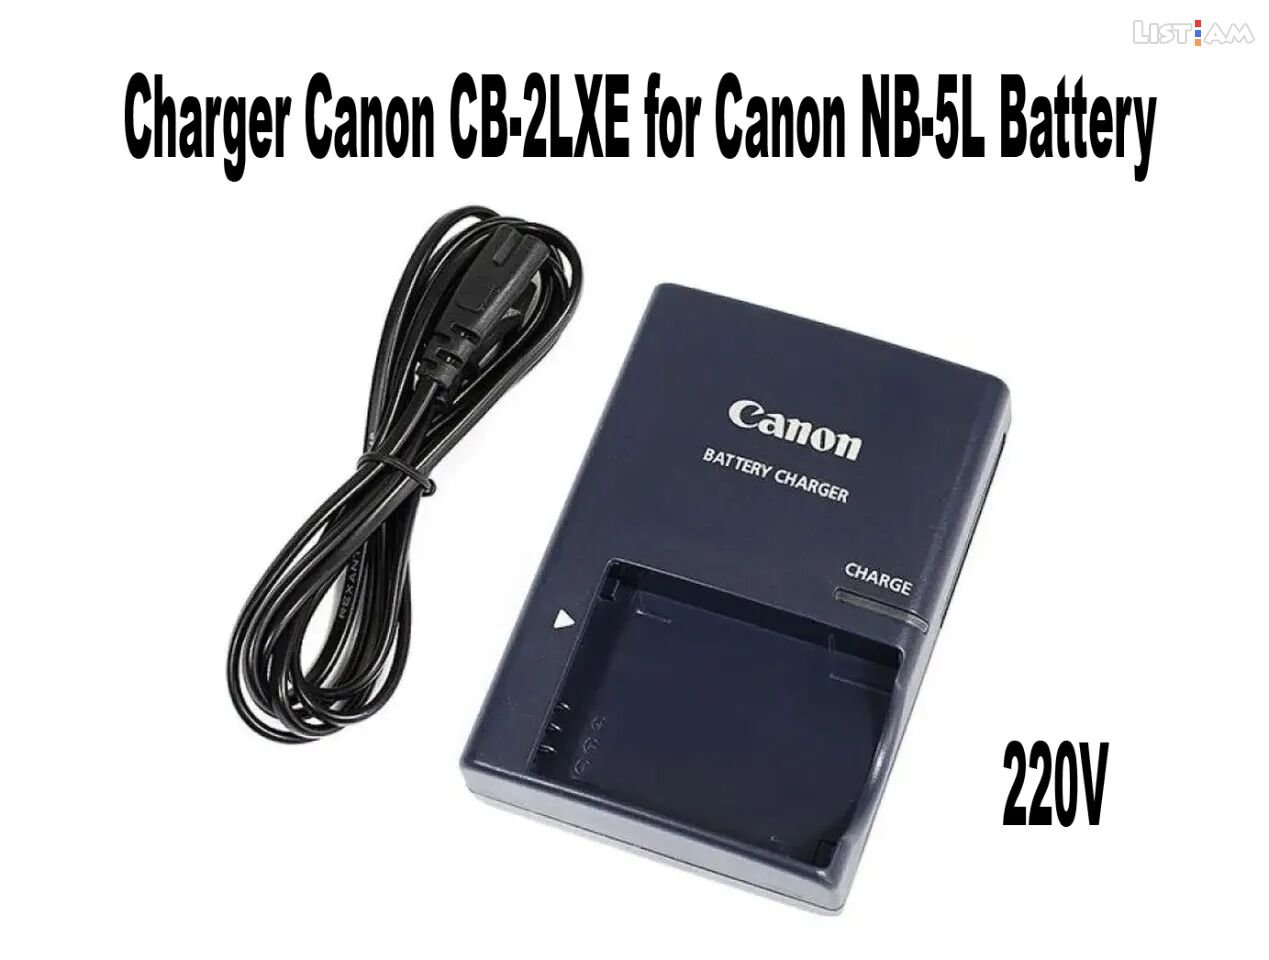 Charger Canon